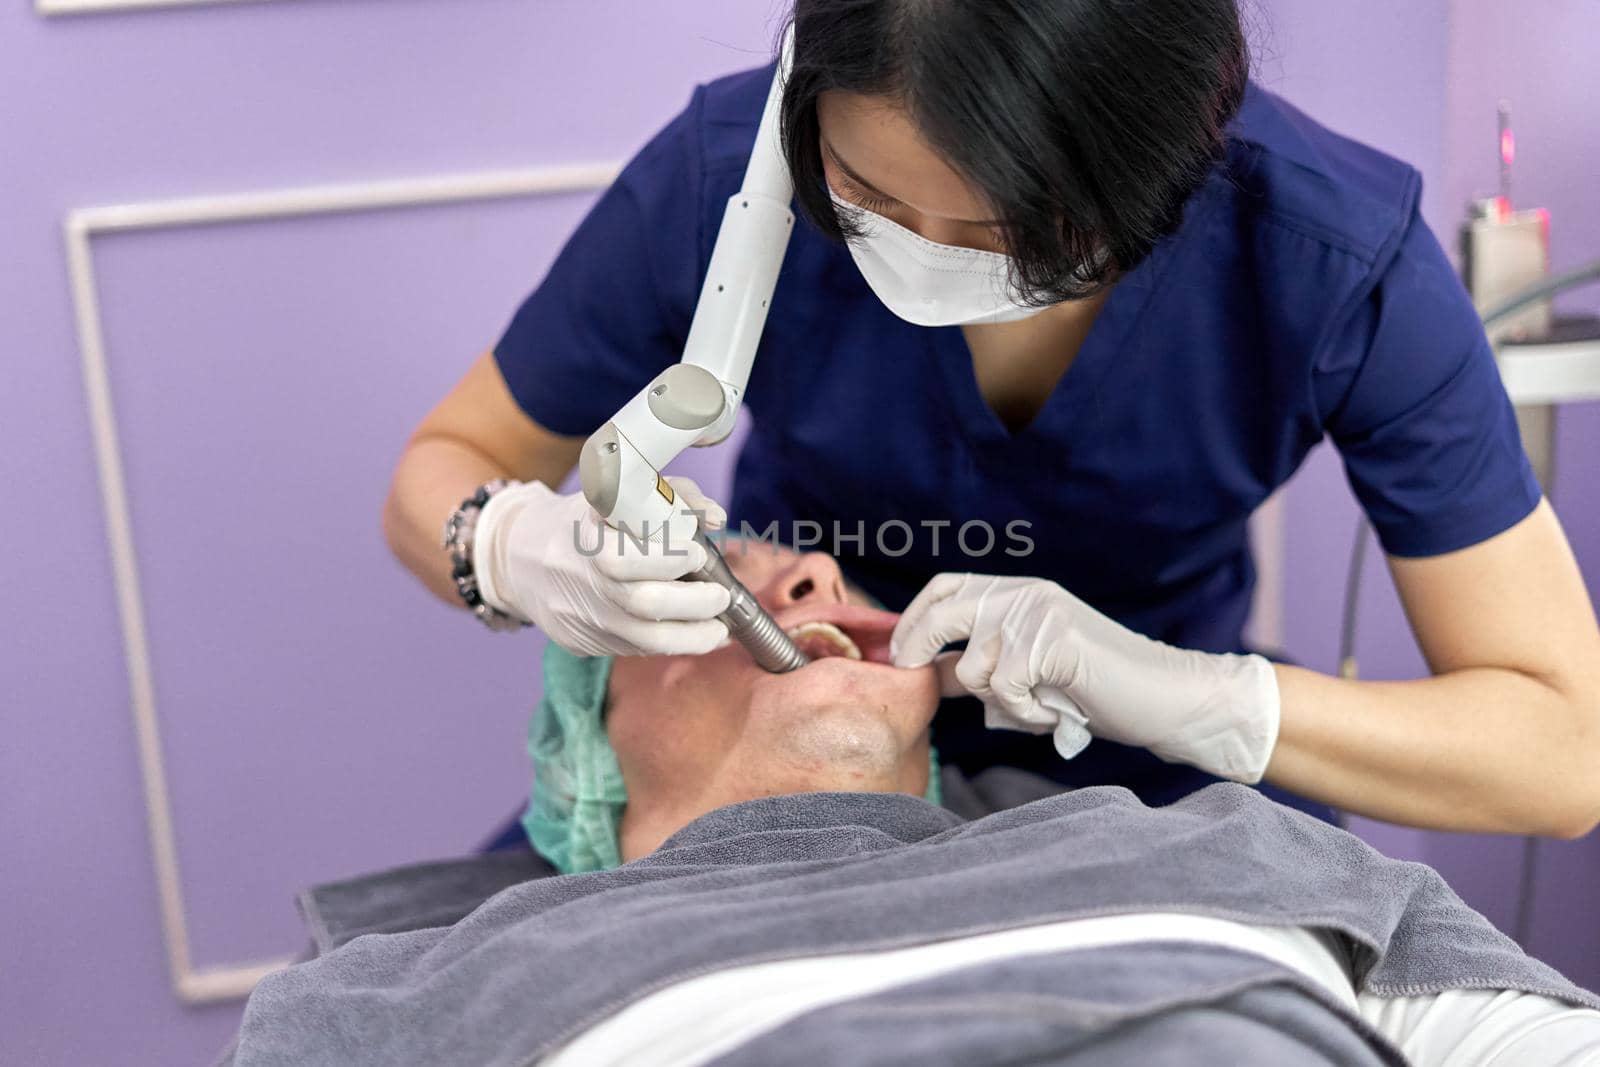 Doctor applying a facial rejuvenation treatment using laser to a patient lying on a stretcher